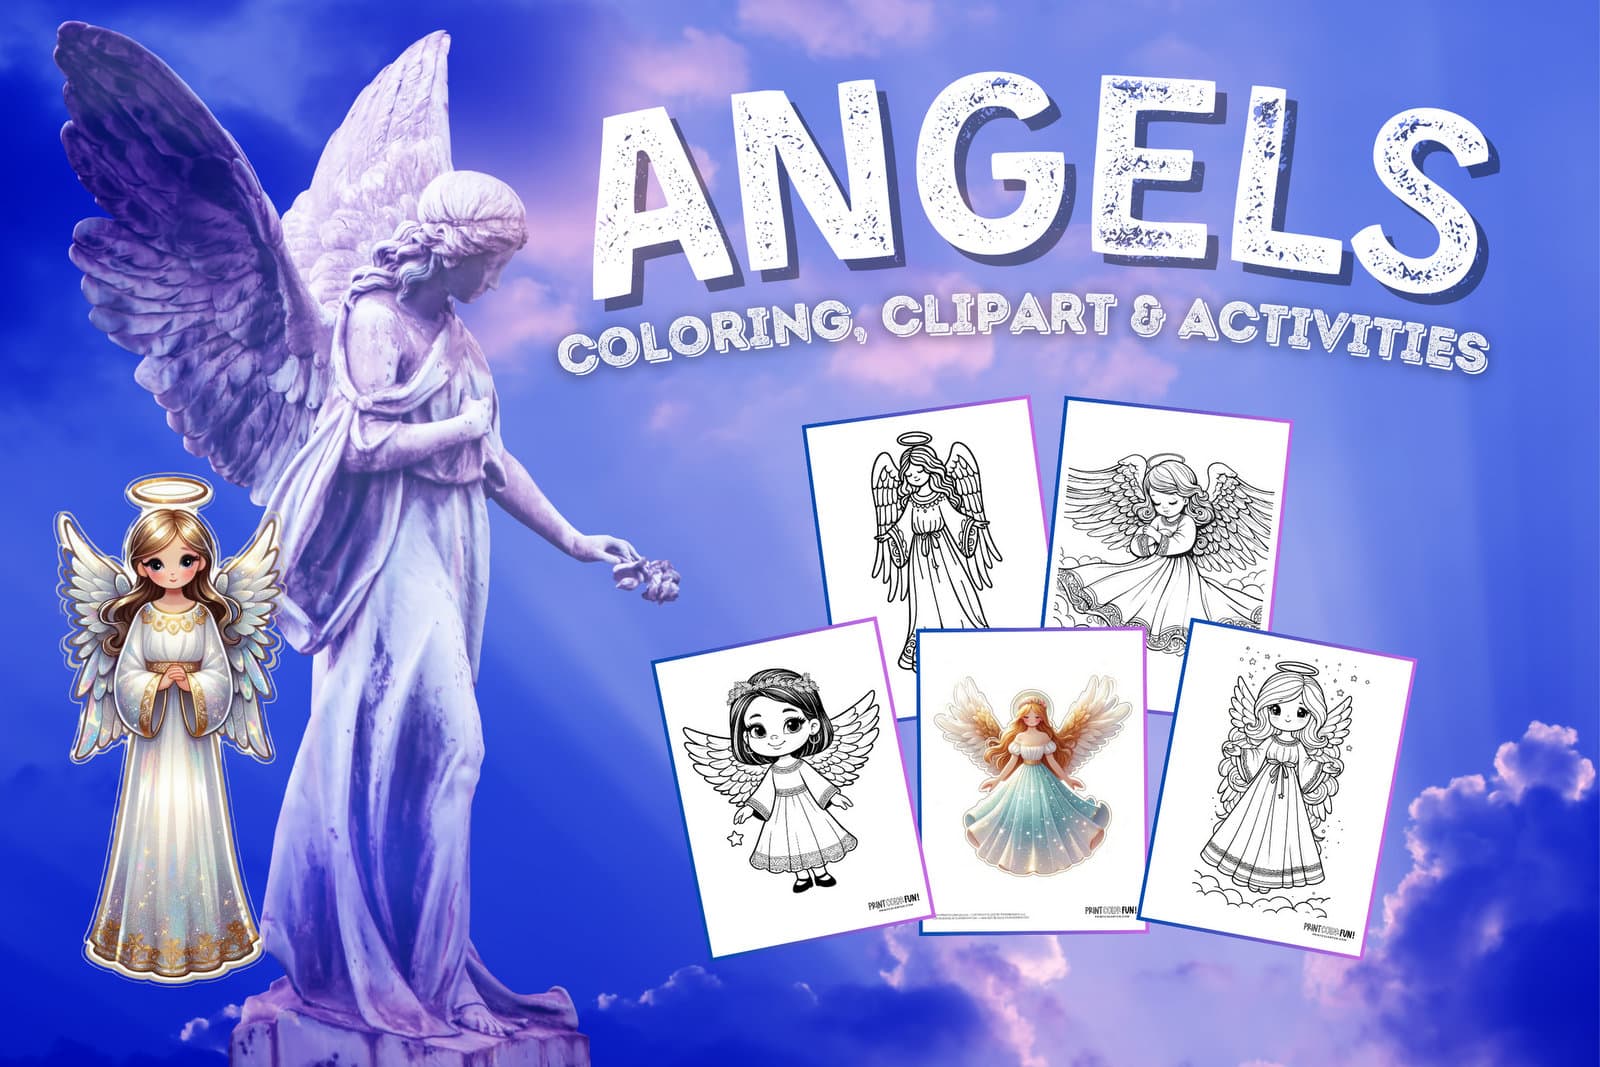 Angel coloring page clipart activities from PrintColorFun com